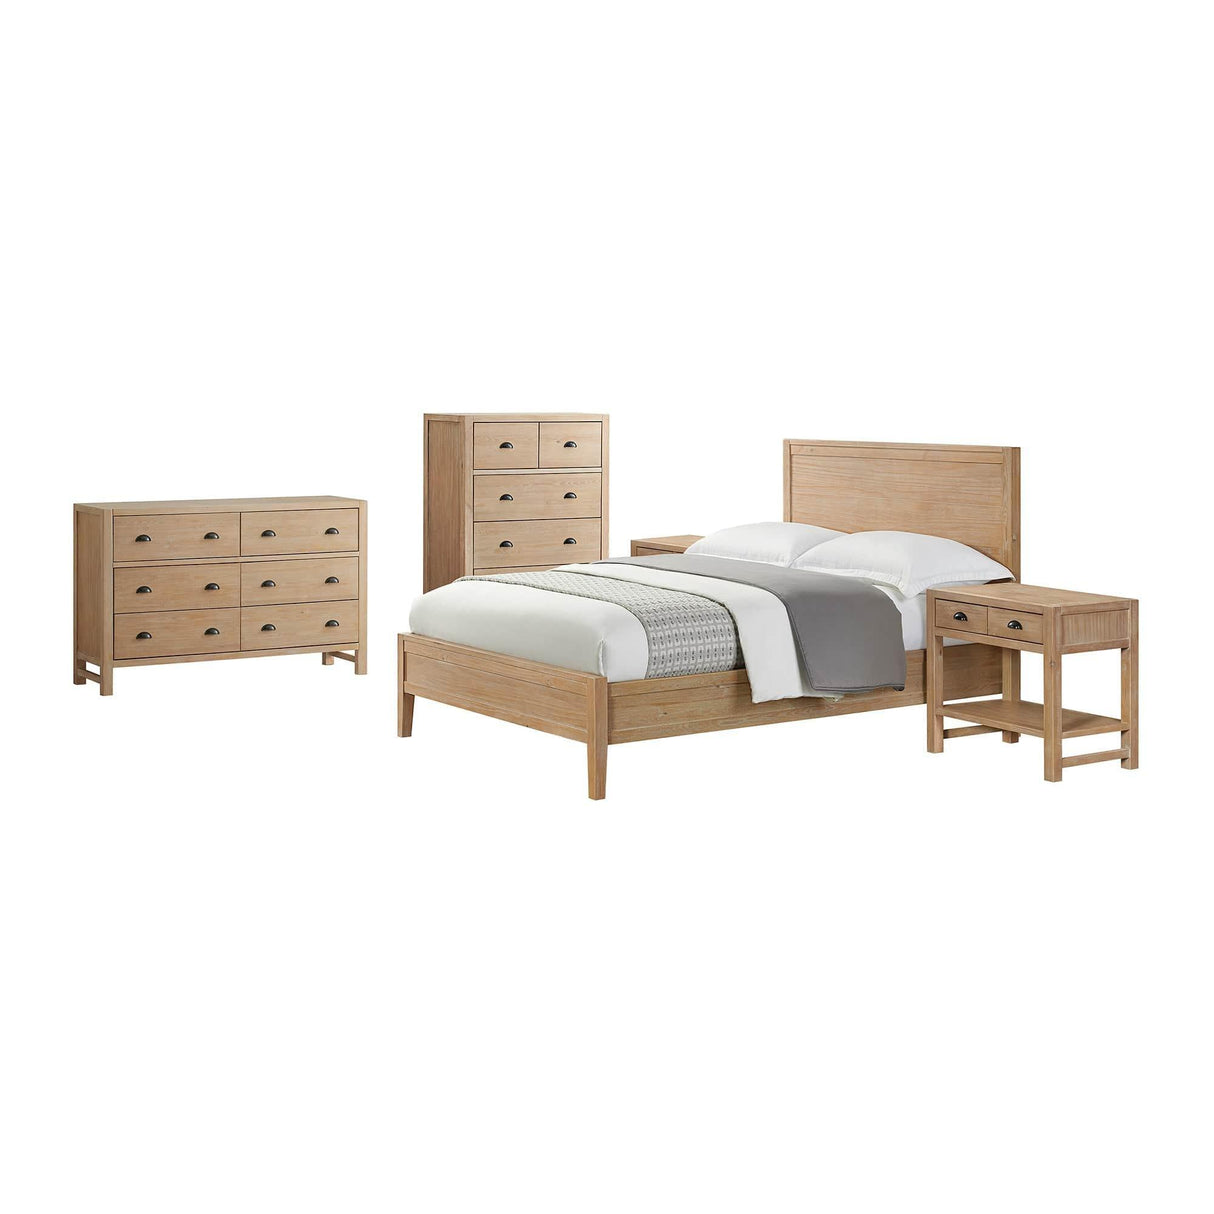 Alaterre Arden 5-Piece King Bedroom Set with King Bed, Two 2-Drawer Nightstands with open shelf, 5-Drawer Chest, 6-Drawer Dresser ANAN022344029 - Bedroom Depot USA